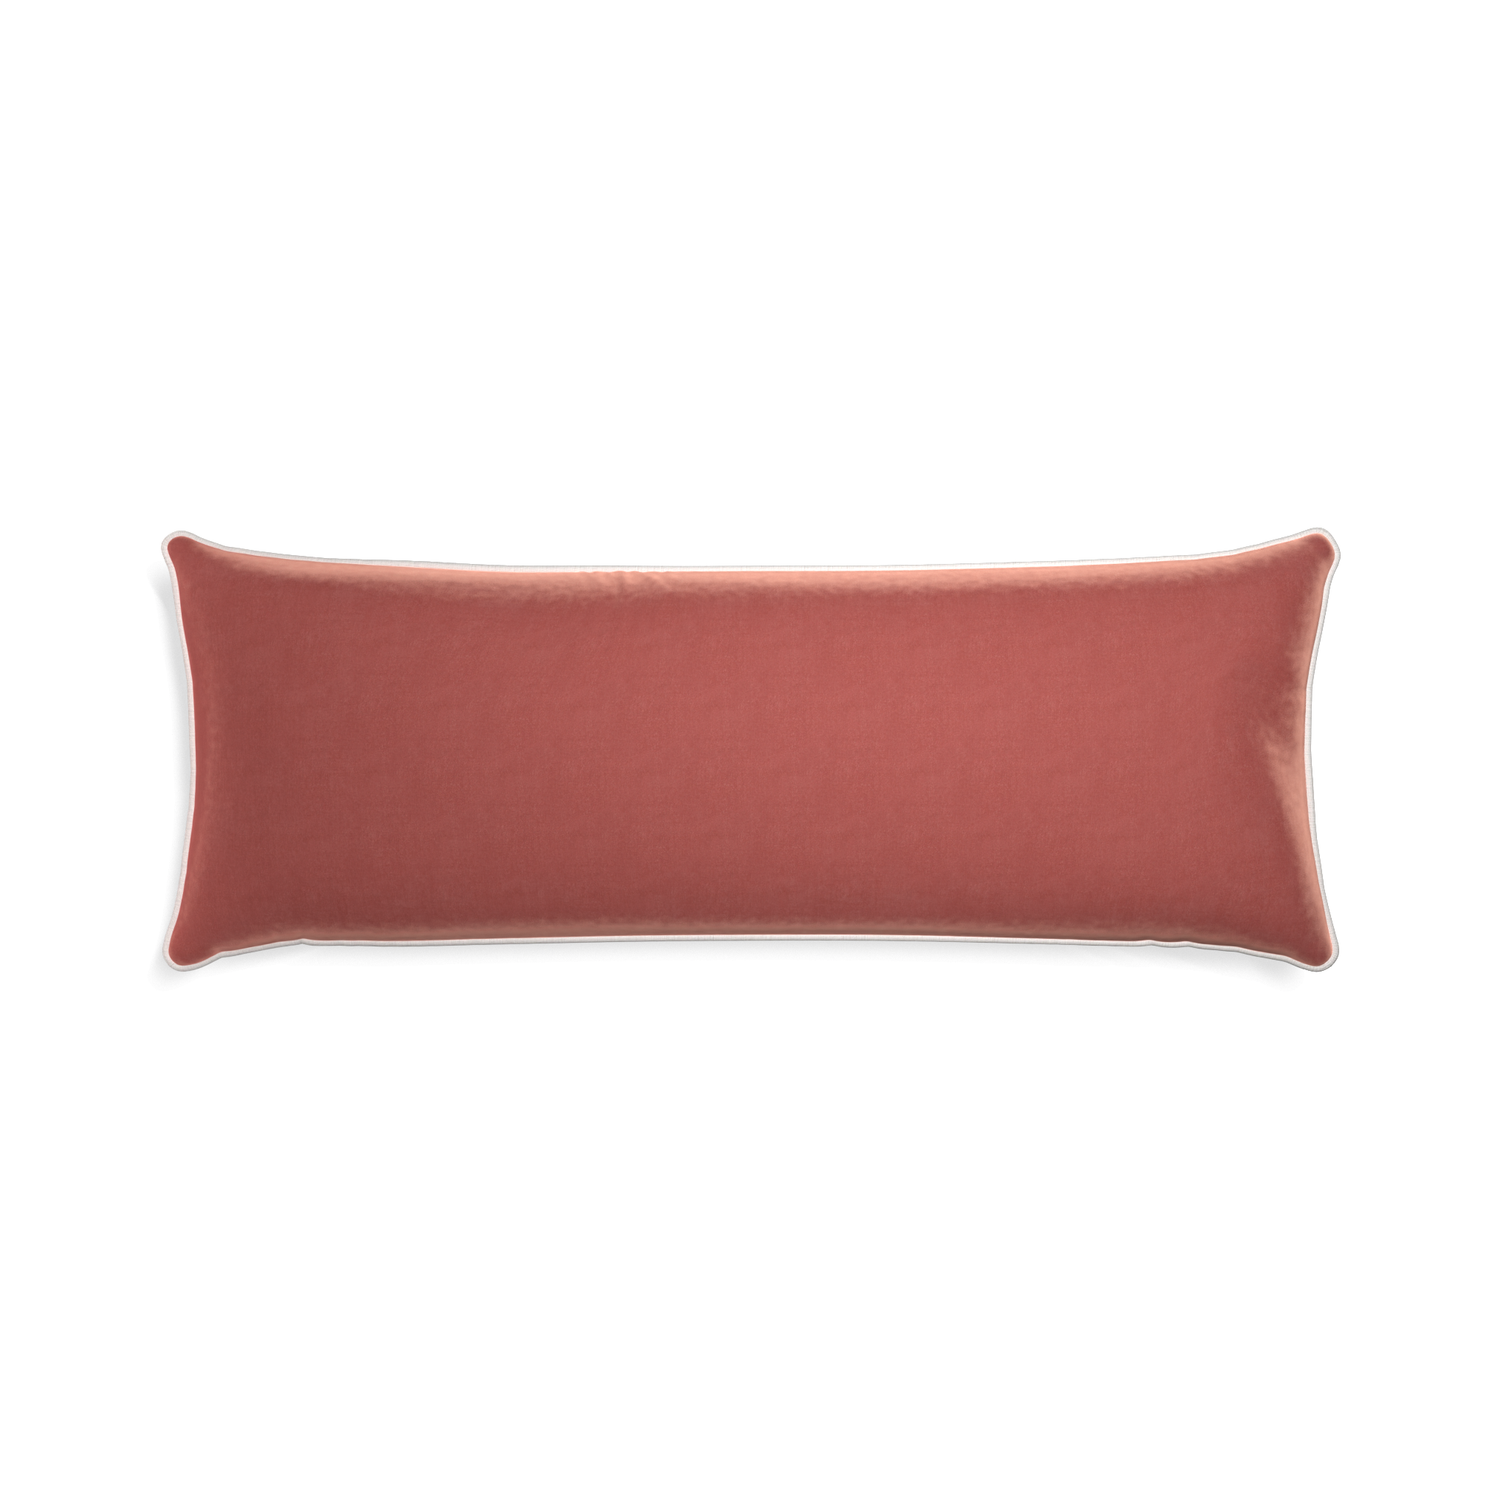 Xl-lumbar cosmo velvet custom coralpillow with snow piping on white background